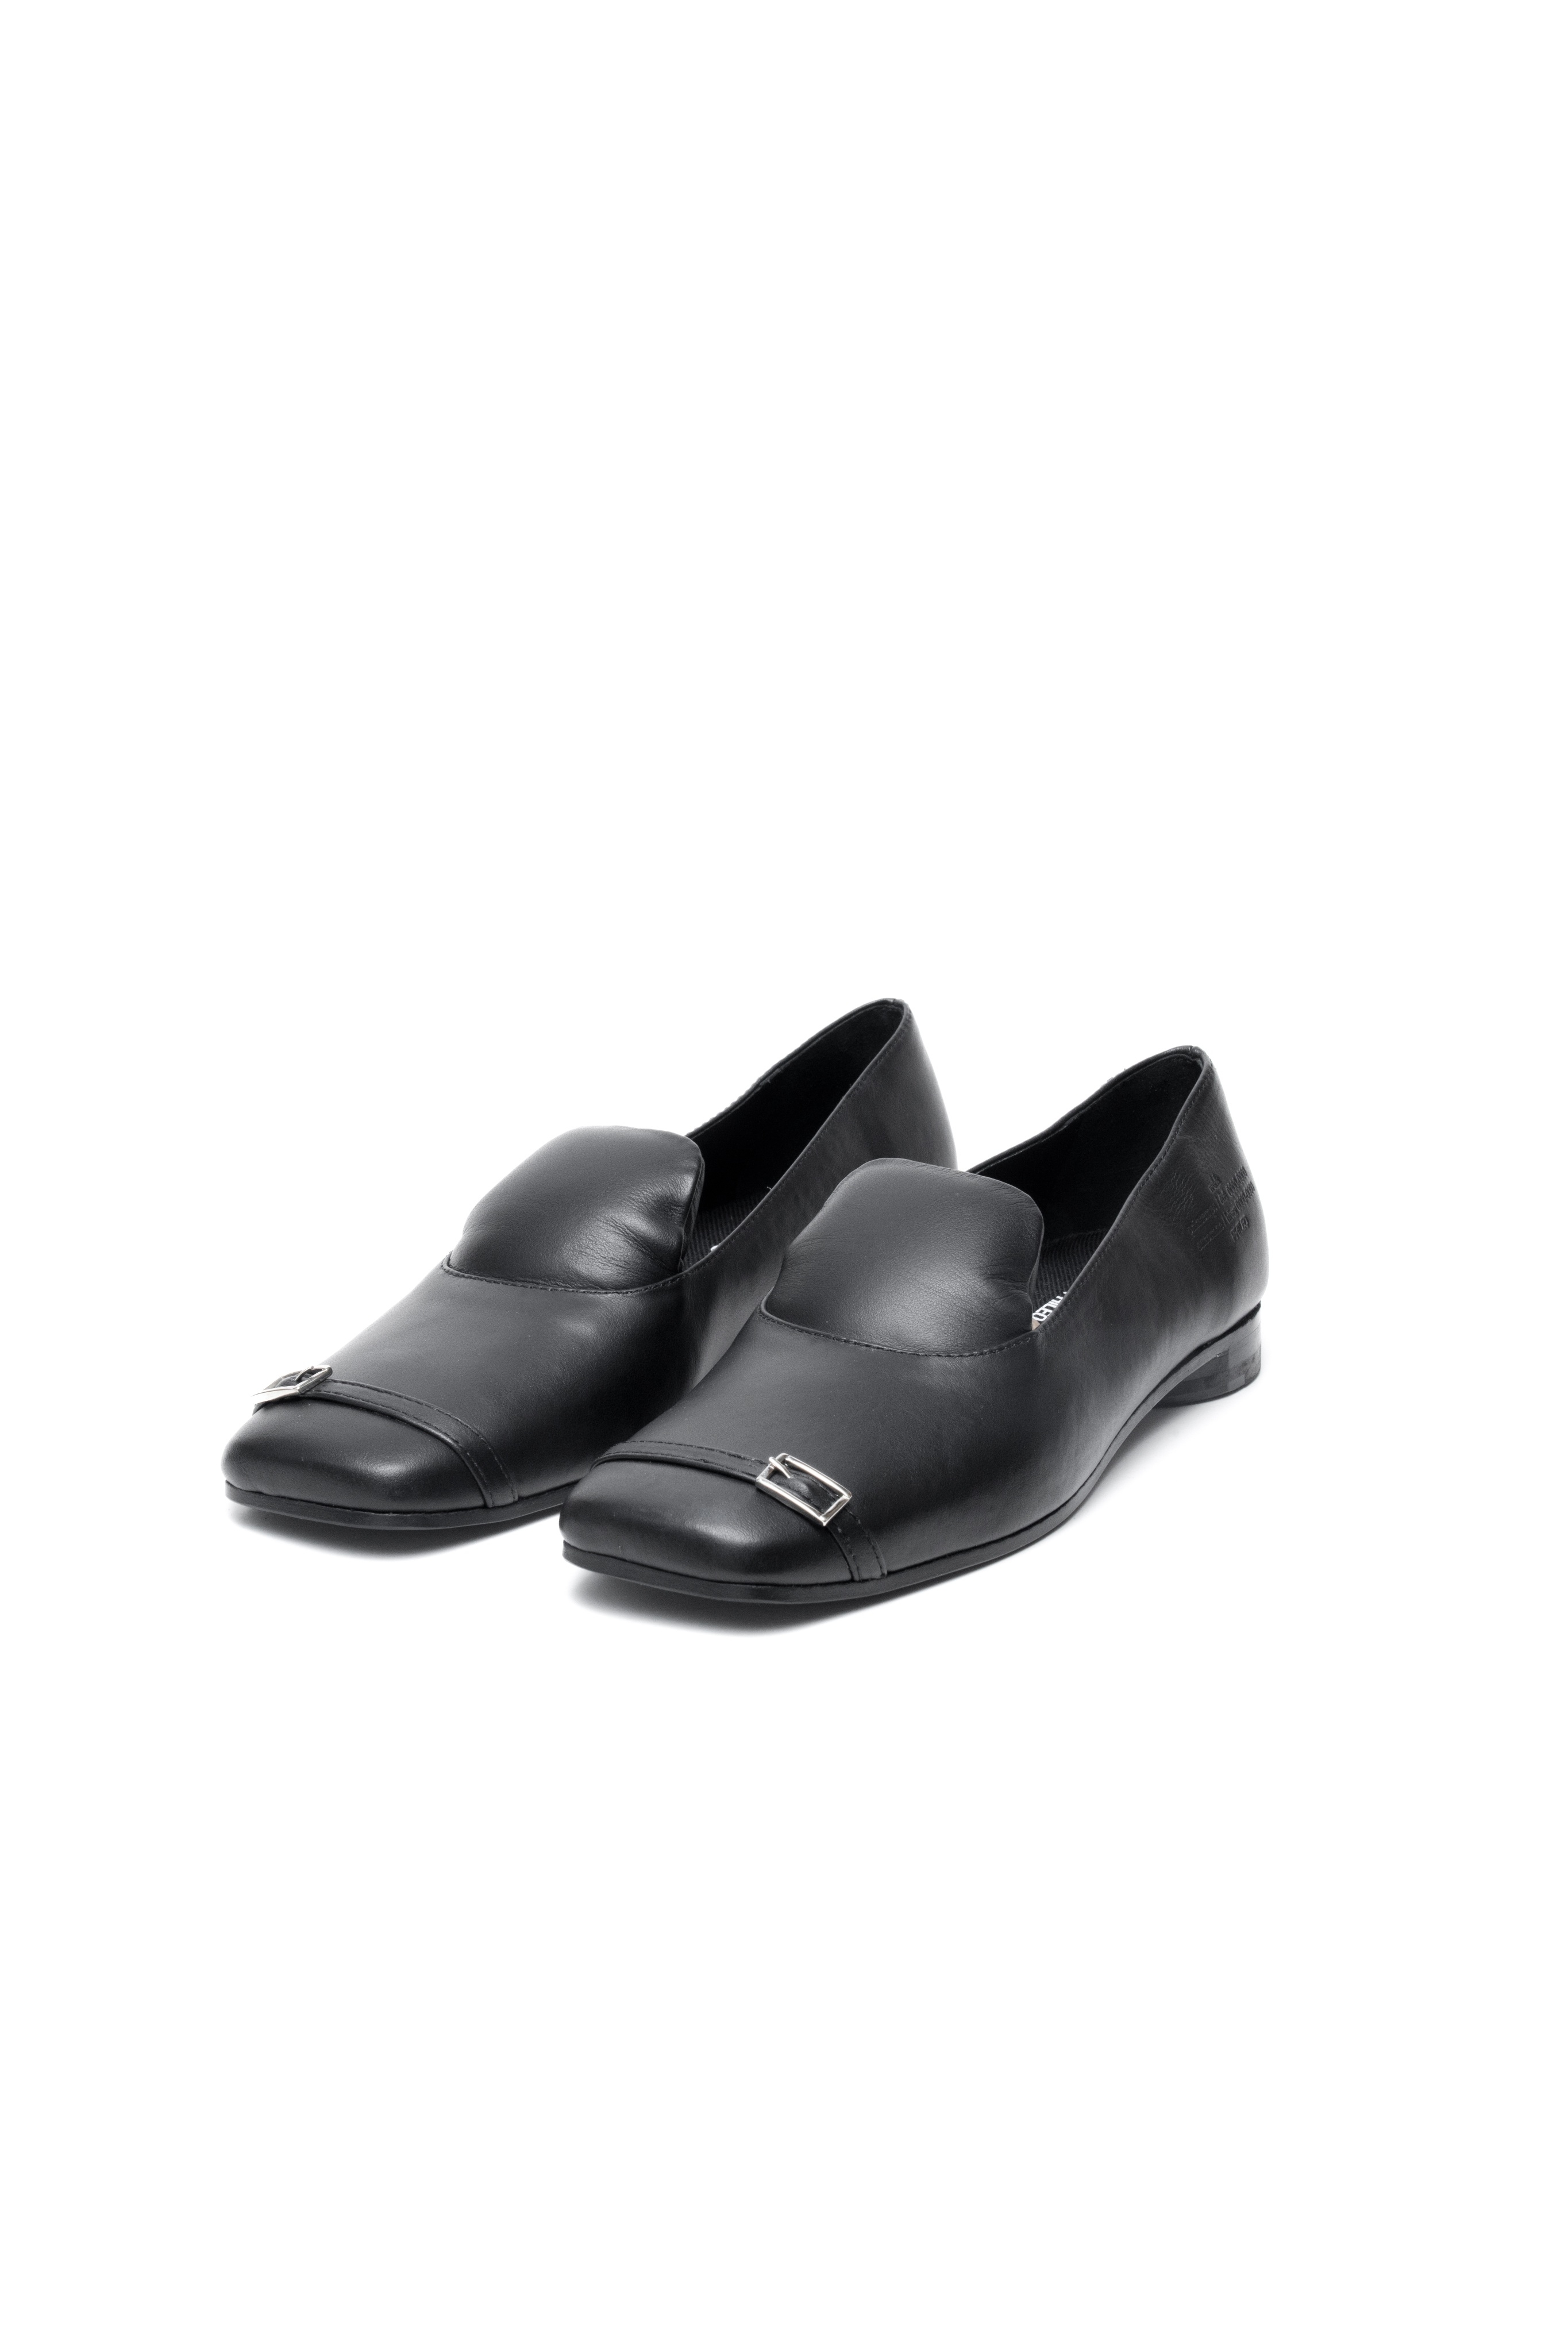 A pair of black leather loafers with a metal detail on a white background